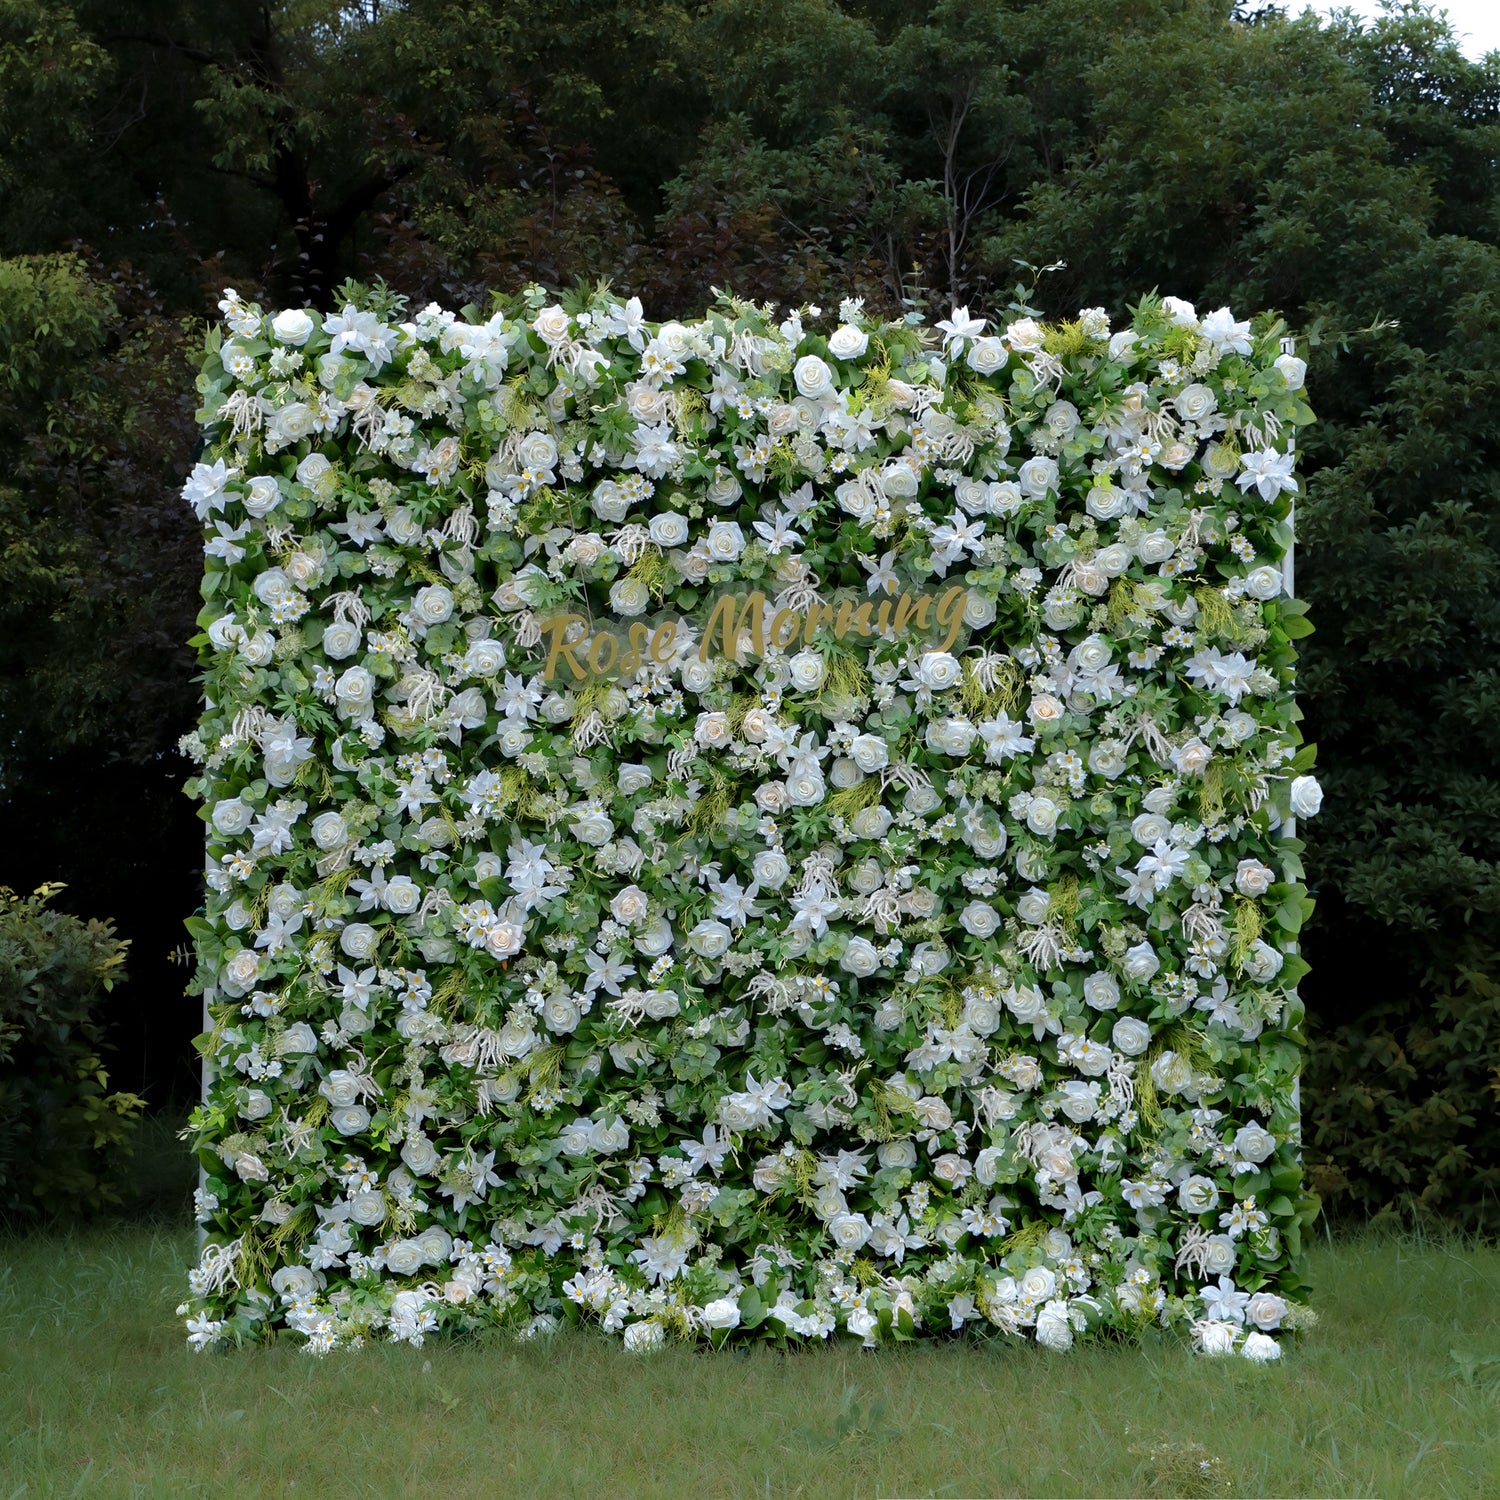 willow: 3D Fabric Artificial Flower Wall Rolling Up Curtain Flower Wall R790 - 8ft*8ft Rose Morning